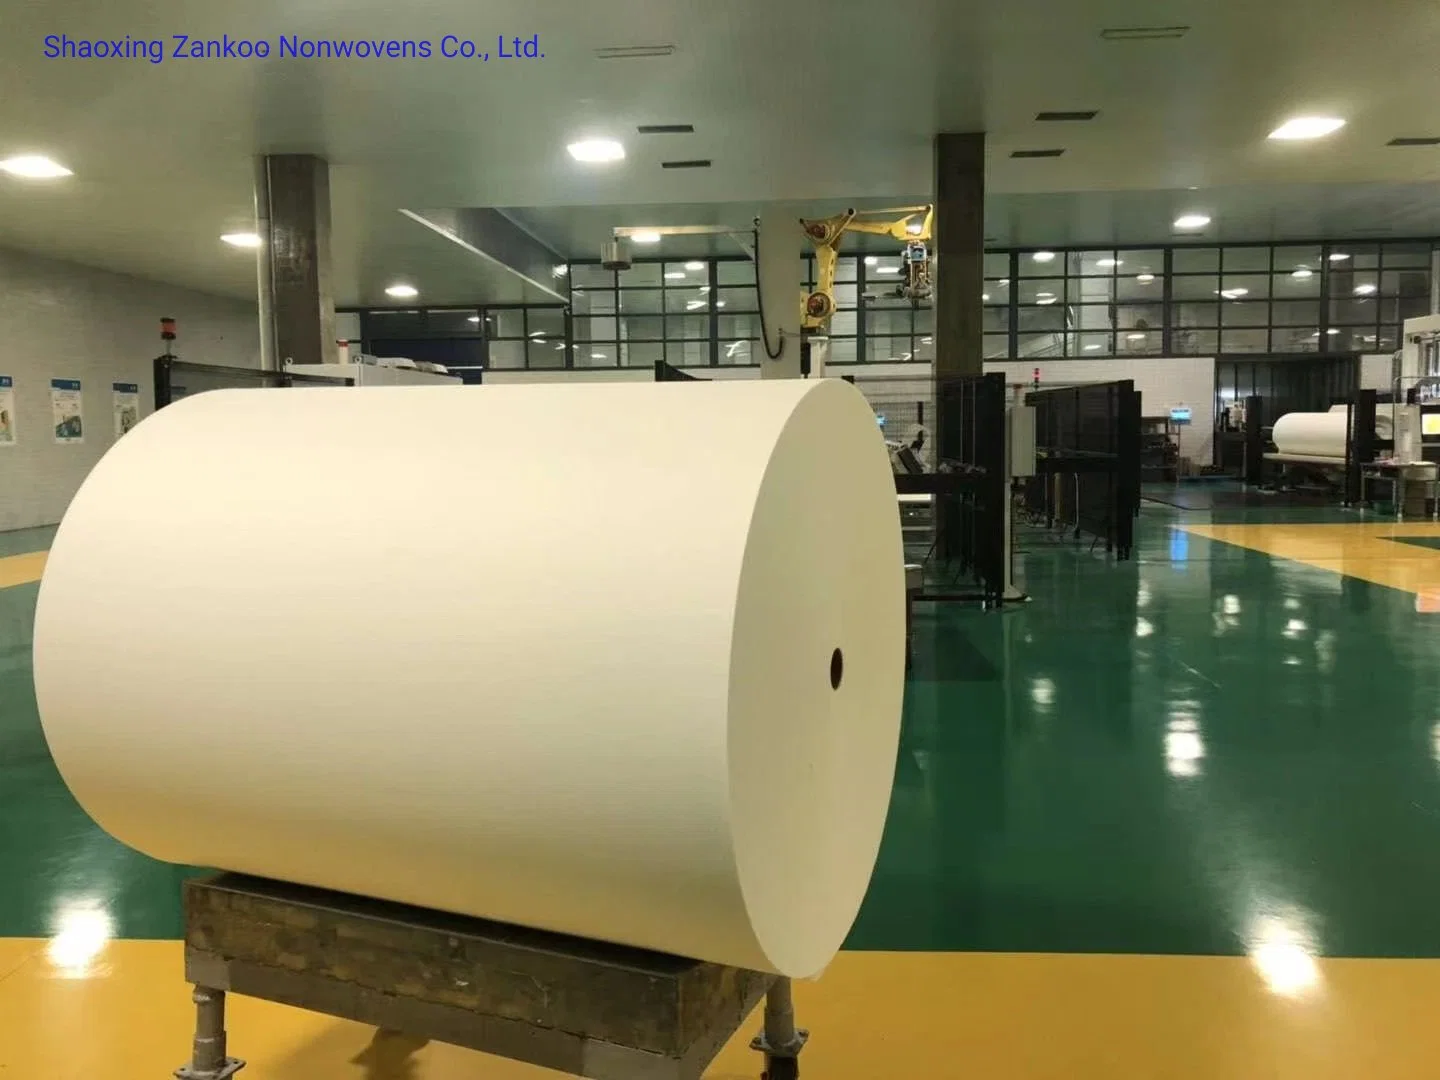 High Absorption 55% Wood Pulp 45% Polyester Nonwoven Fabric for Industrial Cleaning Wipes, 70% Polyester and 30% Rayon Spunlace Non Woven Fabric for Wet Wipes